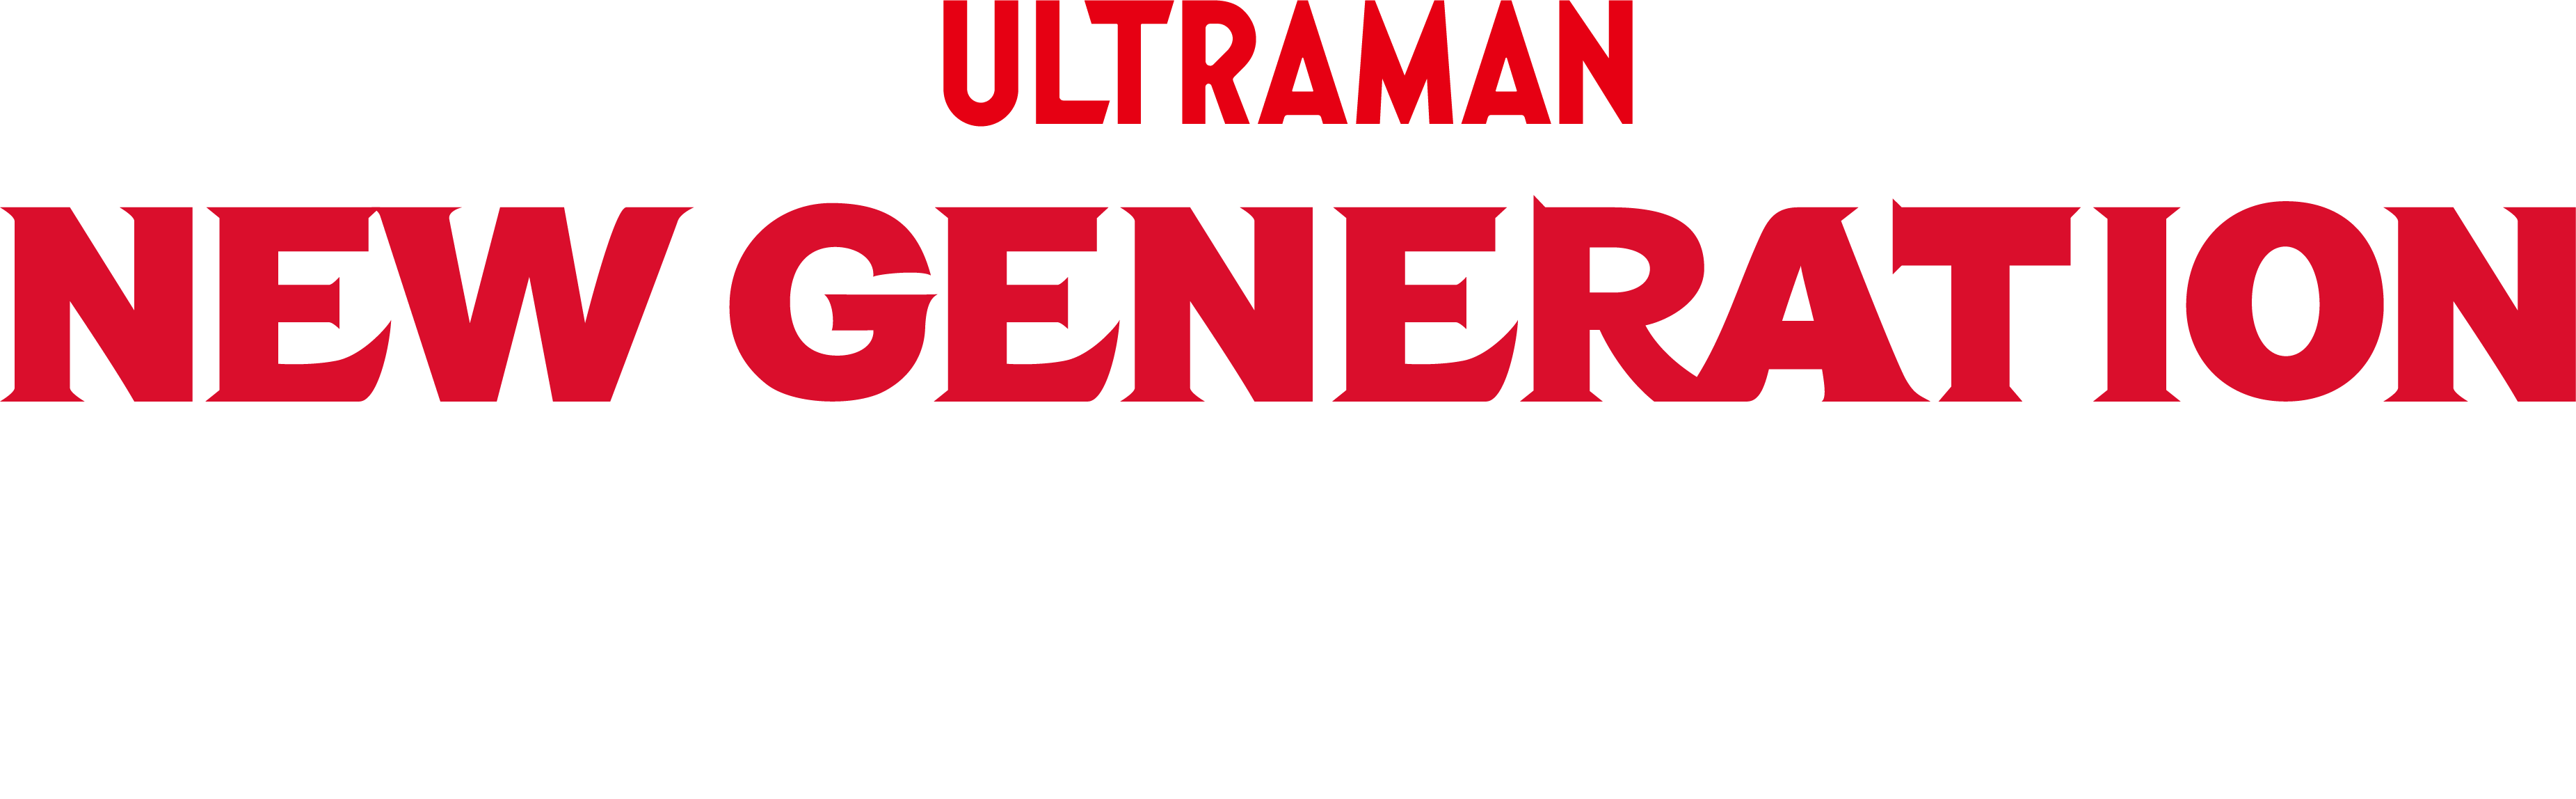 NEW GENERATION THE LIVE スターズ編